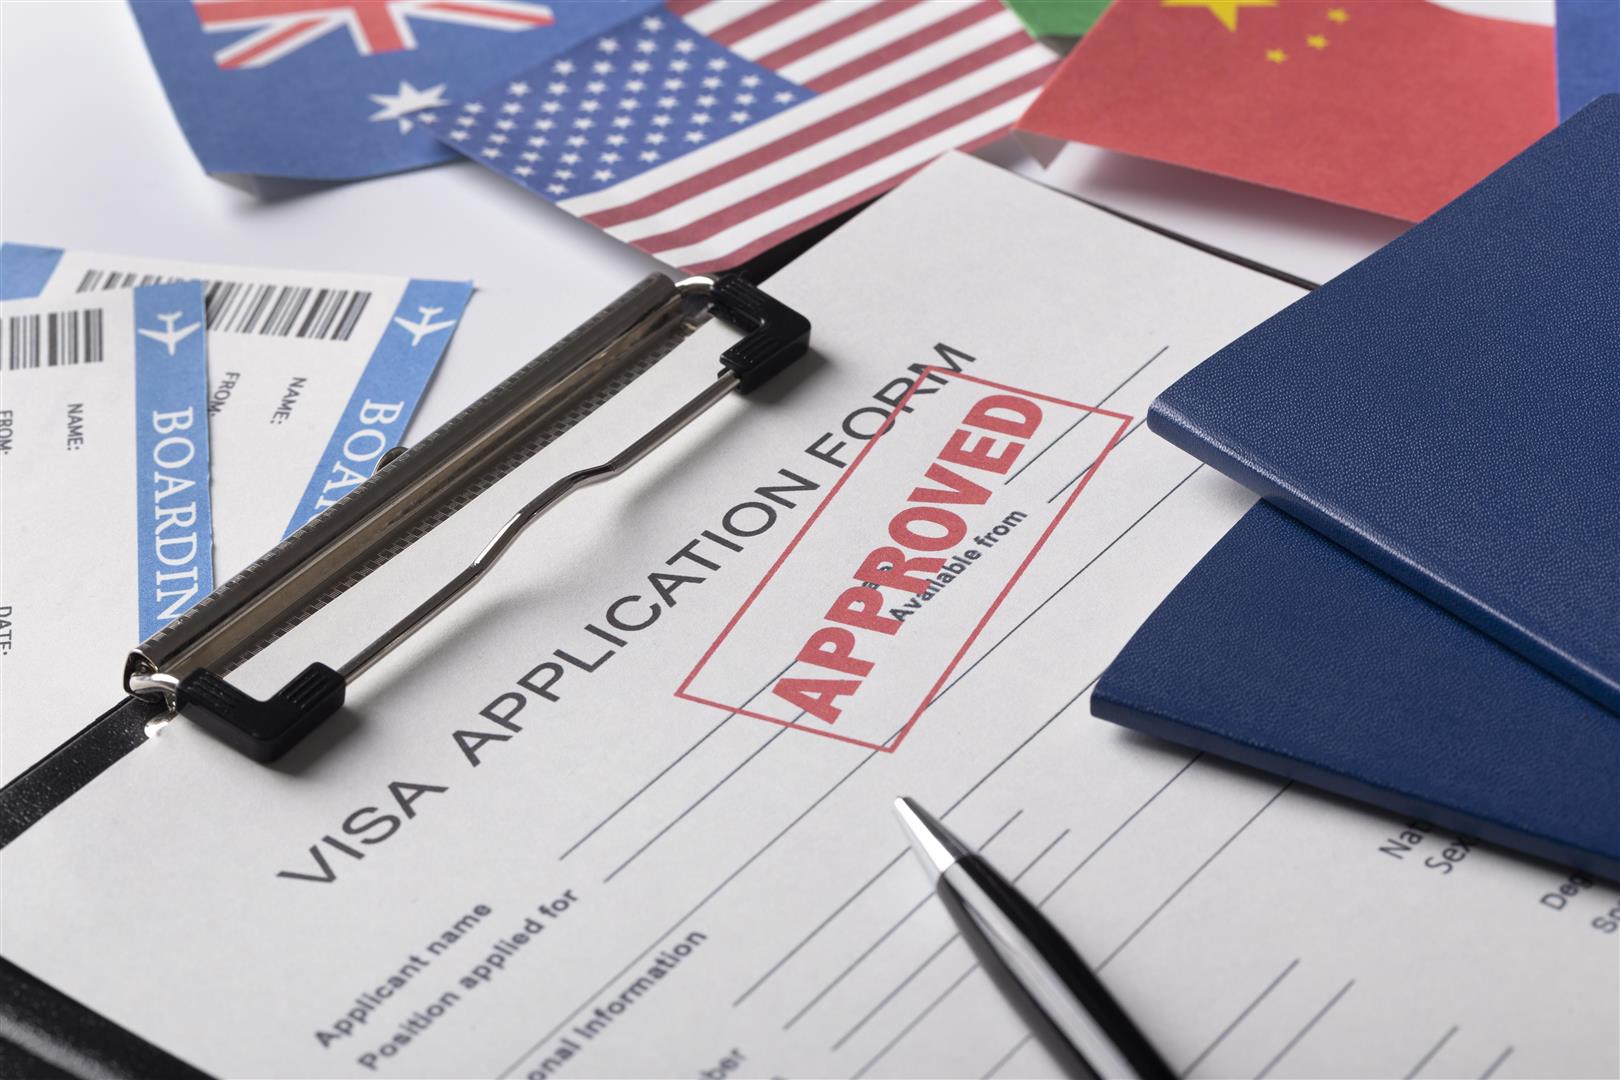 How to apply for an official visa